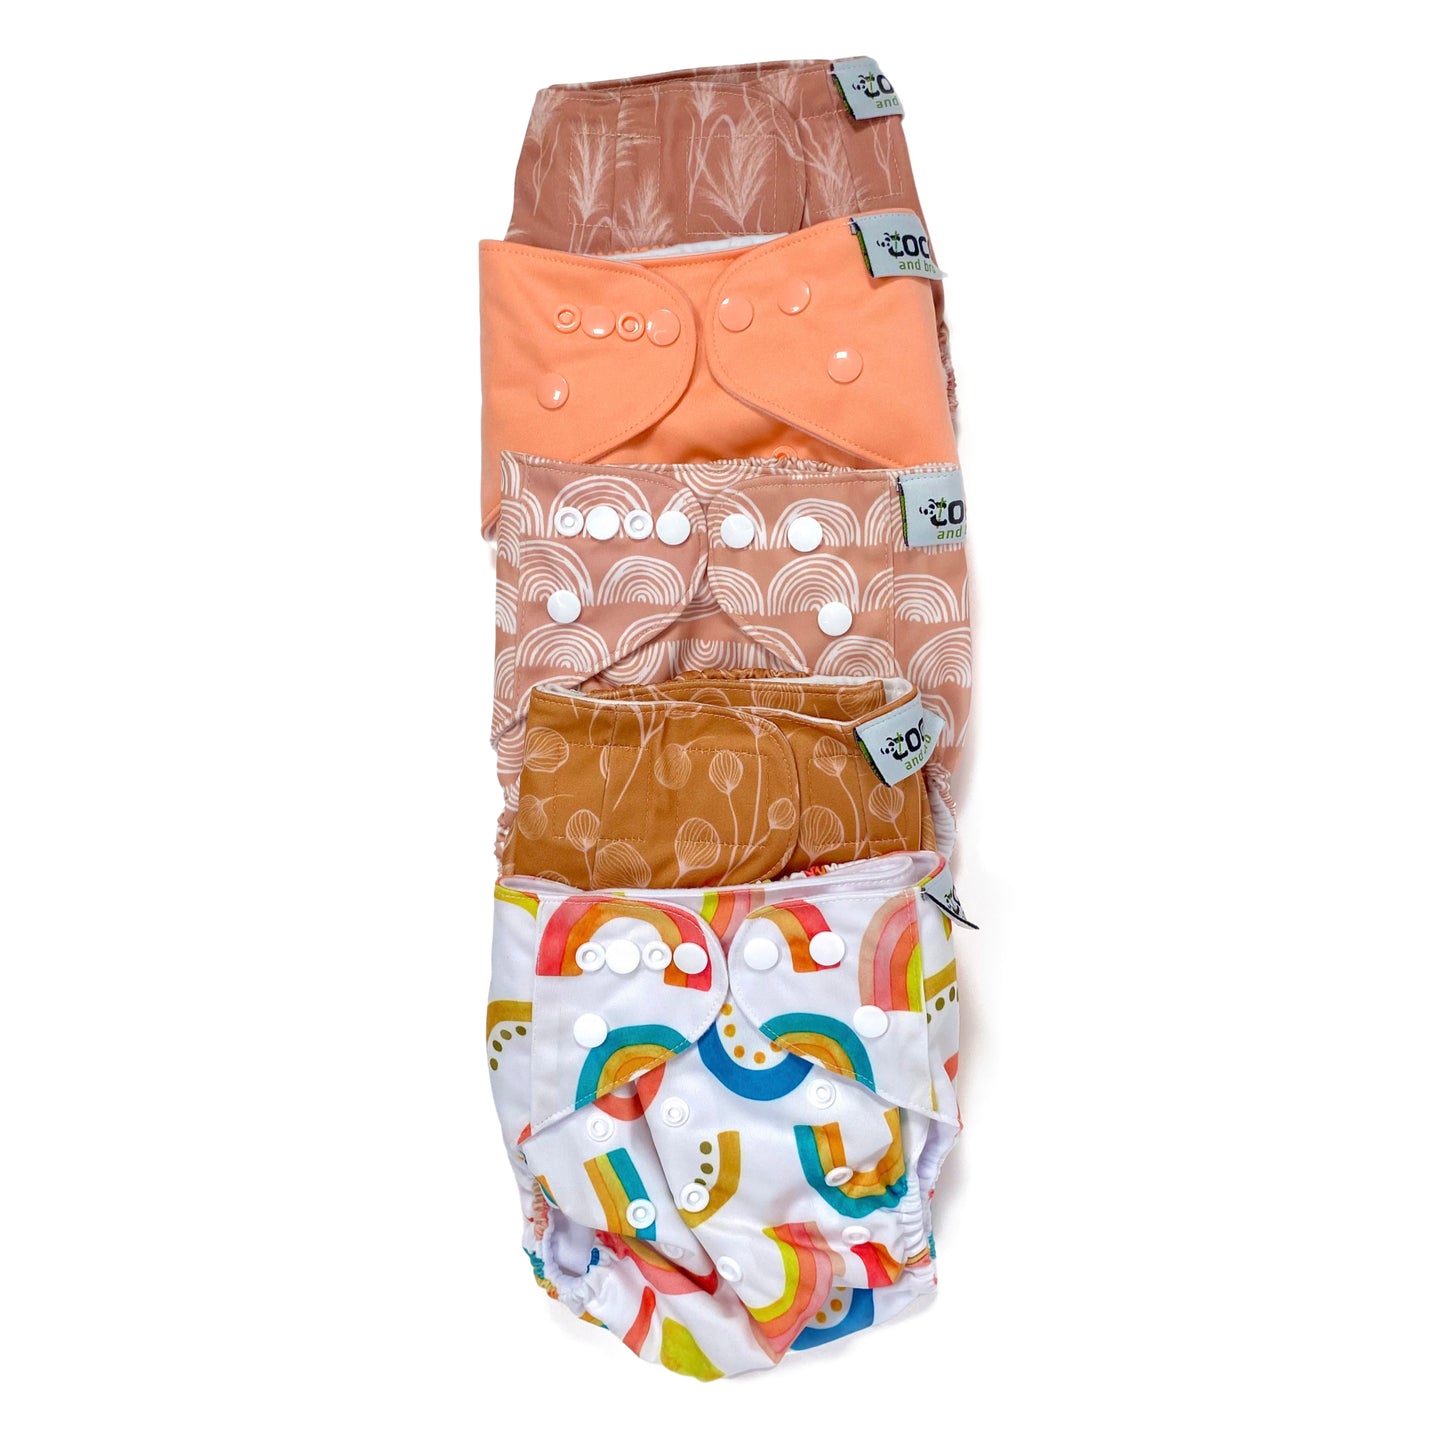 A set of five reusable nappies, made from 100% recycled polyester. The included nappies are: Bright Rainbow, Copper Bloom, Peach Rainbow, Cute Coral and Sunset Dune. View shows all five nappies front facing, in a vertical line.